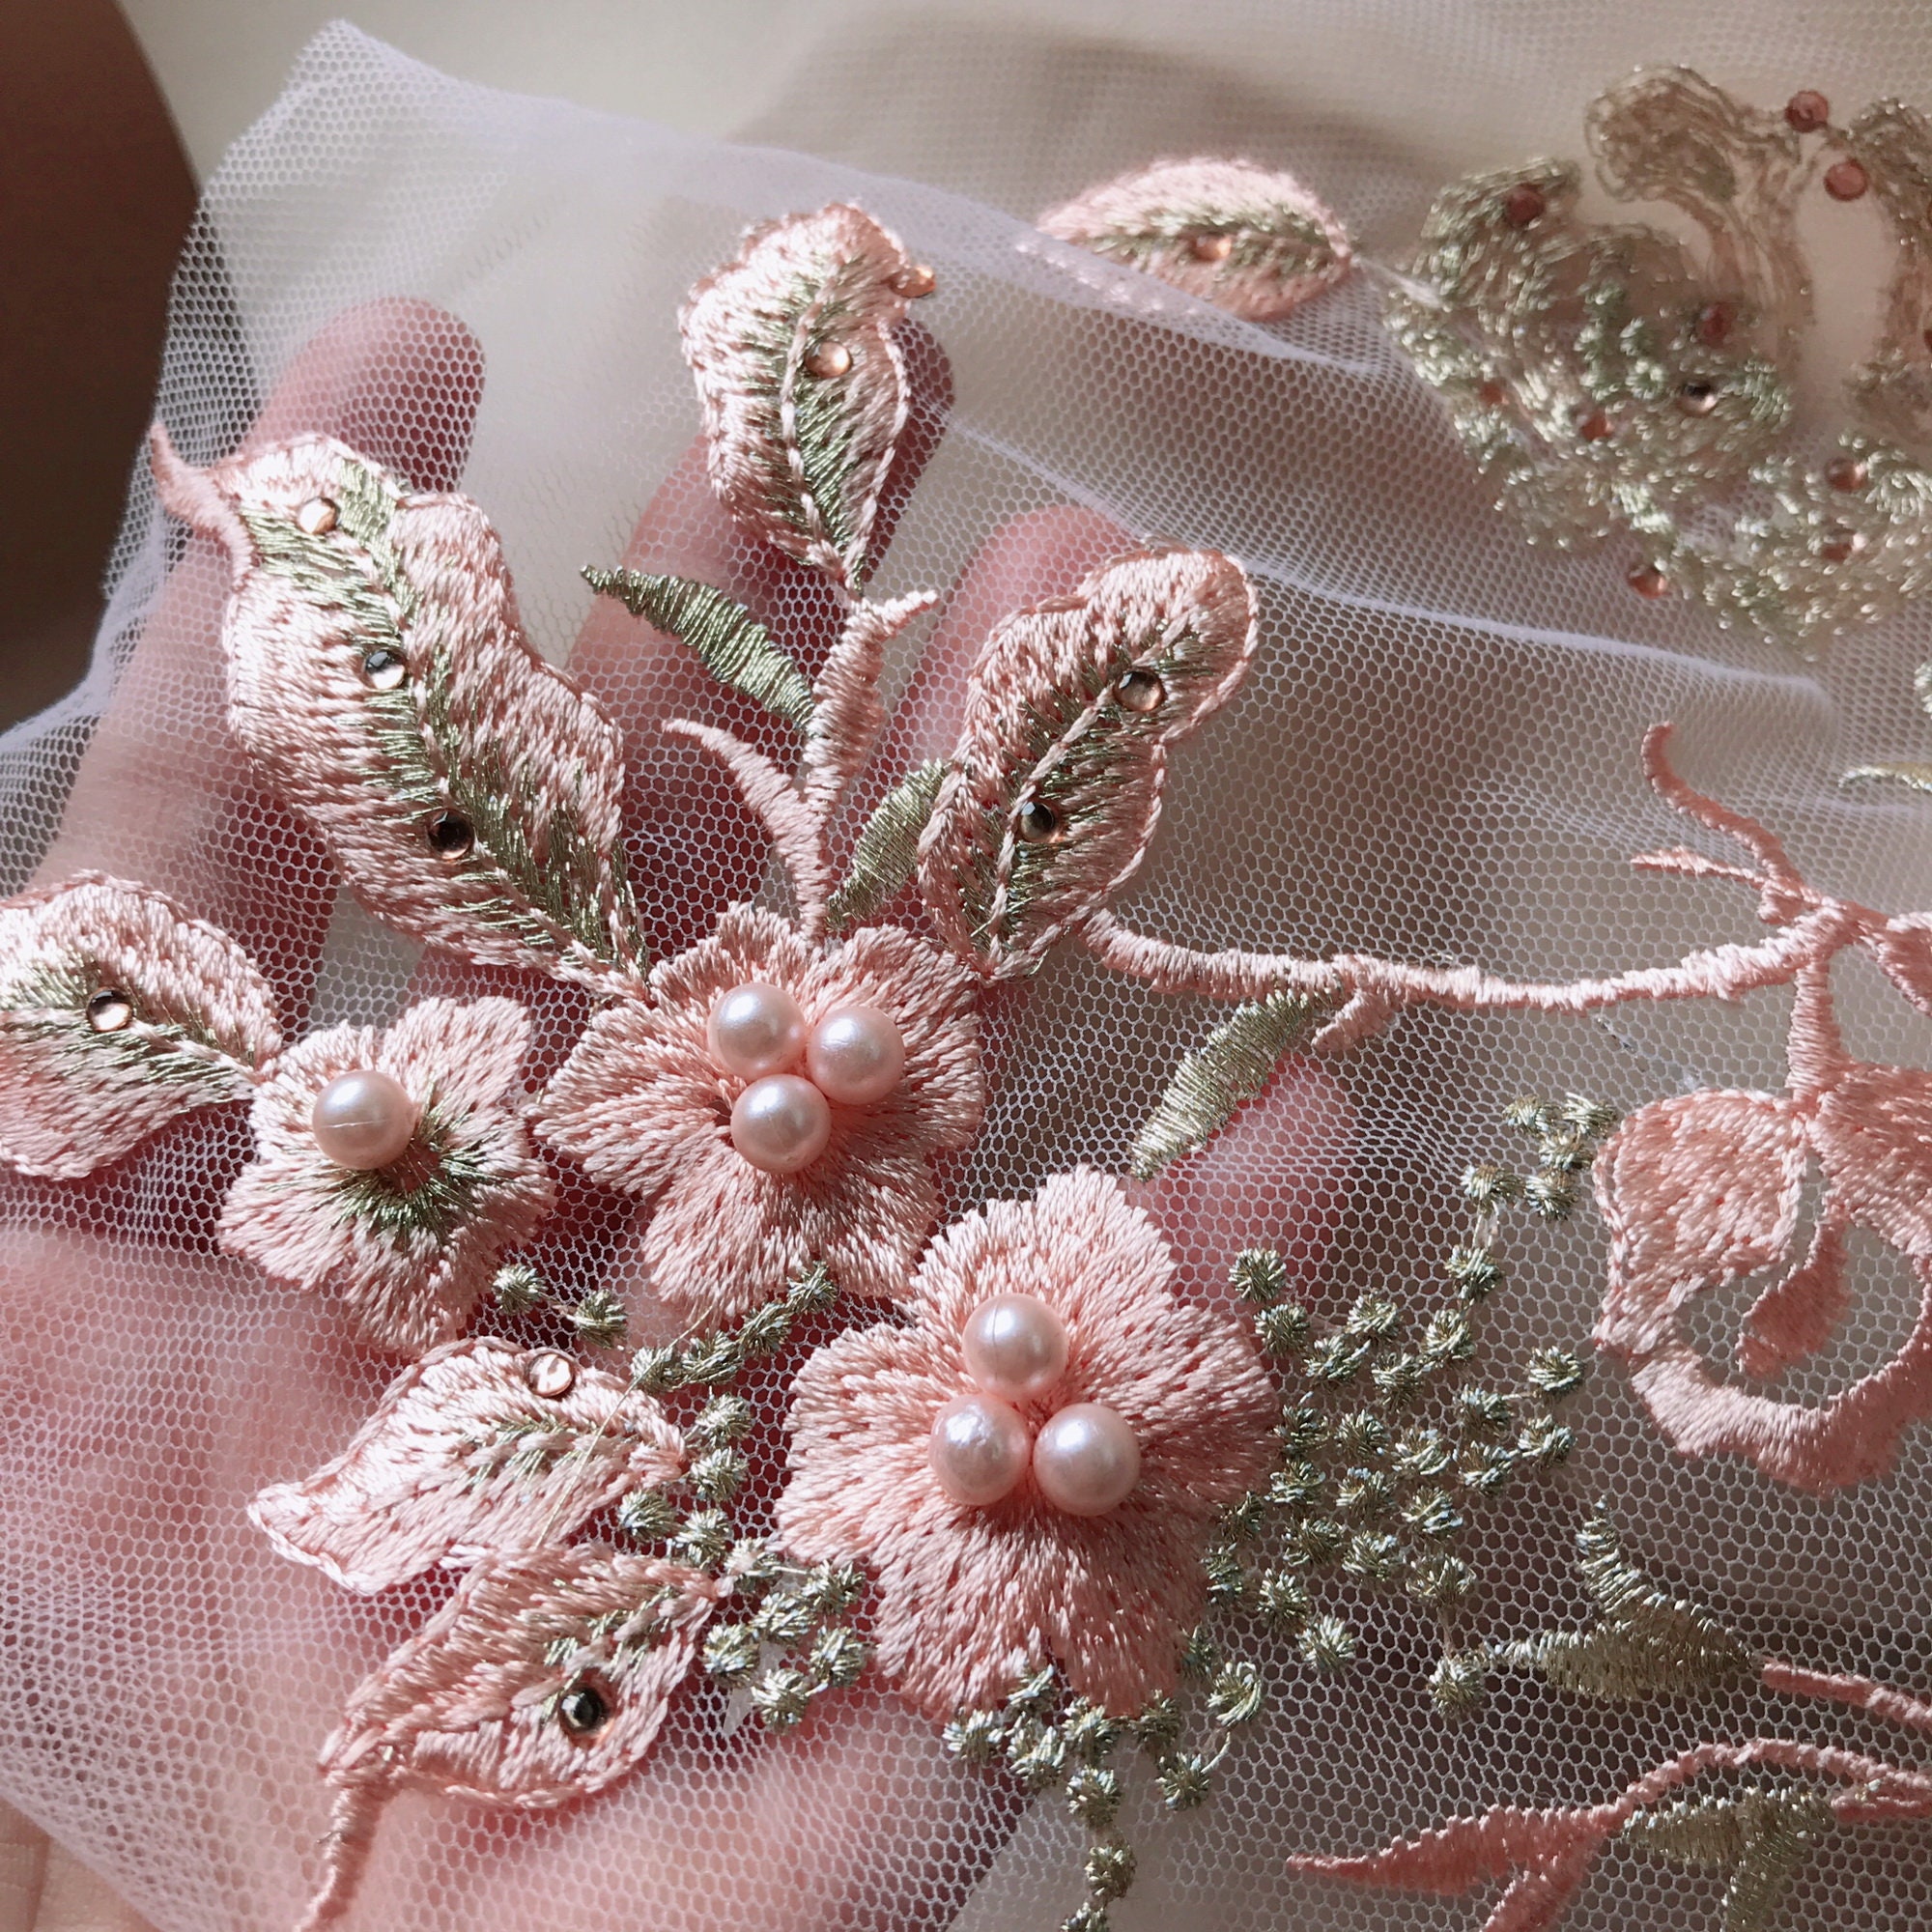 3D Flower Blush Pink Applique with Pearls